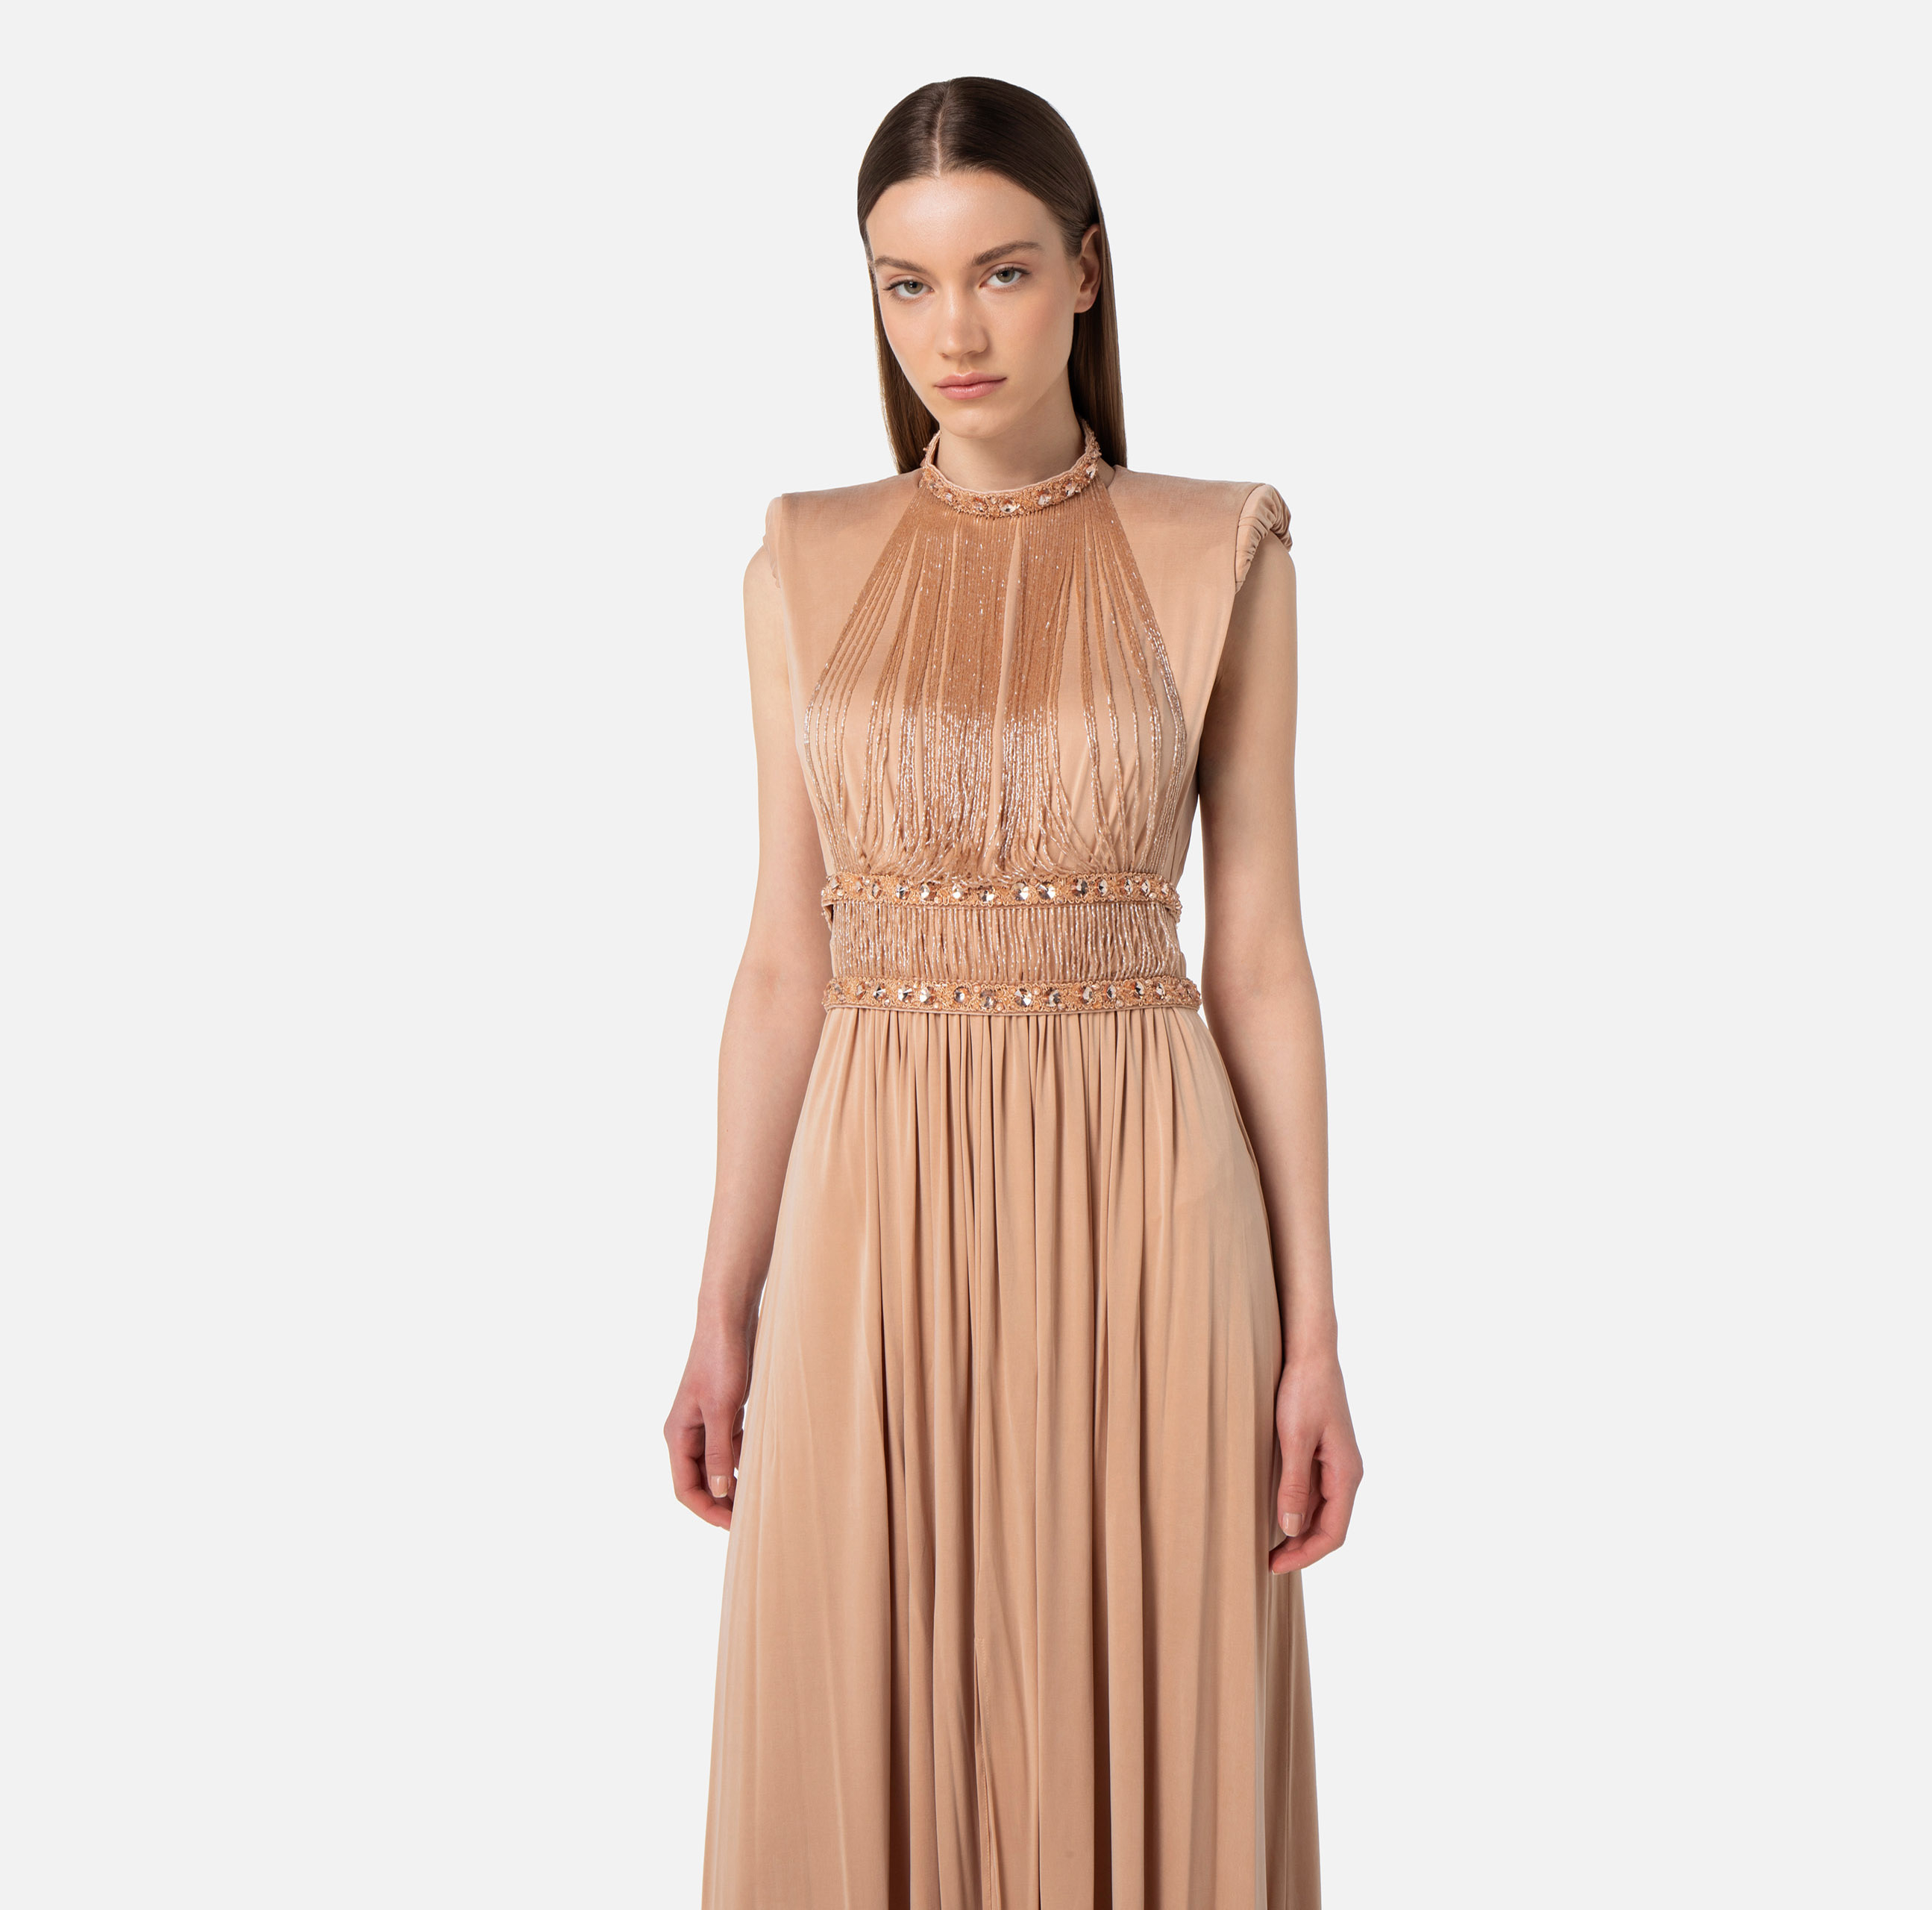 Red Carpet dress in cupro jersey with necklace - Elisabetta Franchi